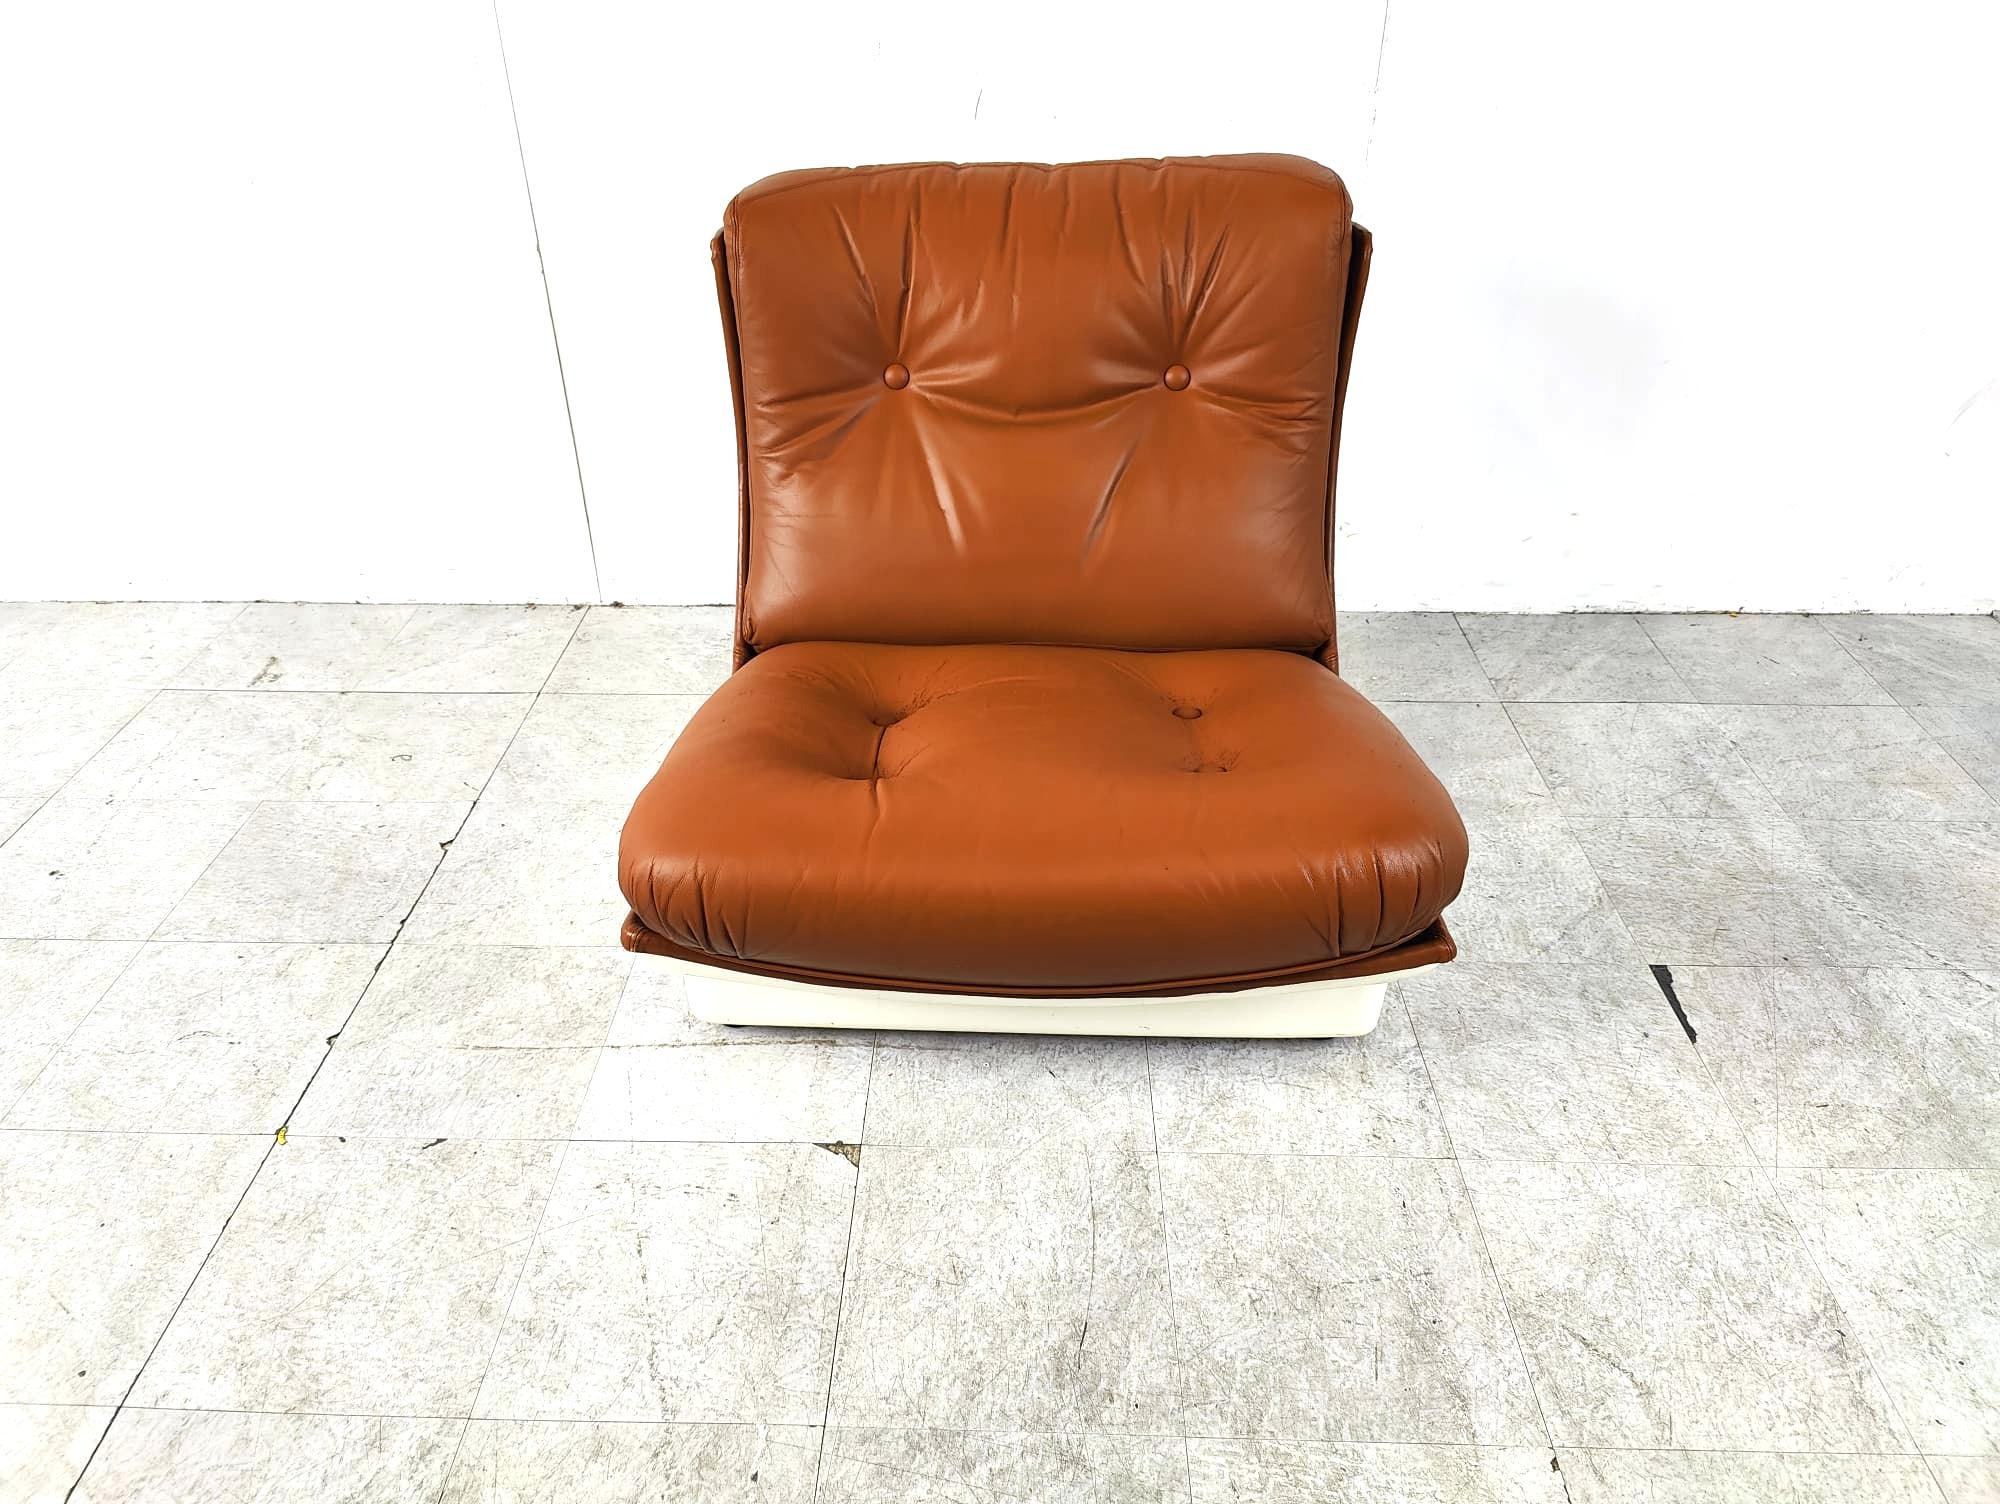 Striking space age lounge chair by Airborne international.

The chair consists of a white fiberglass shell upholstered with brown butonned leather.

It sits as comfortable as it looks.

Good condition, original upholstery with patina, no